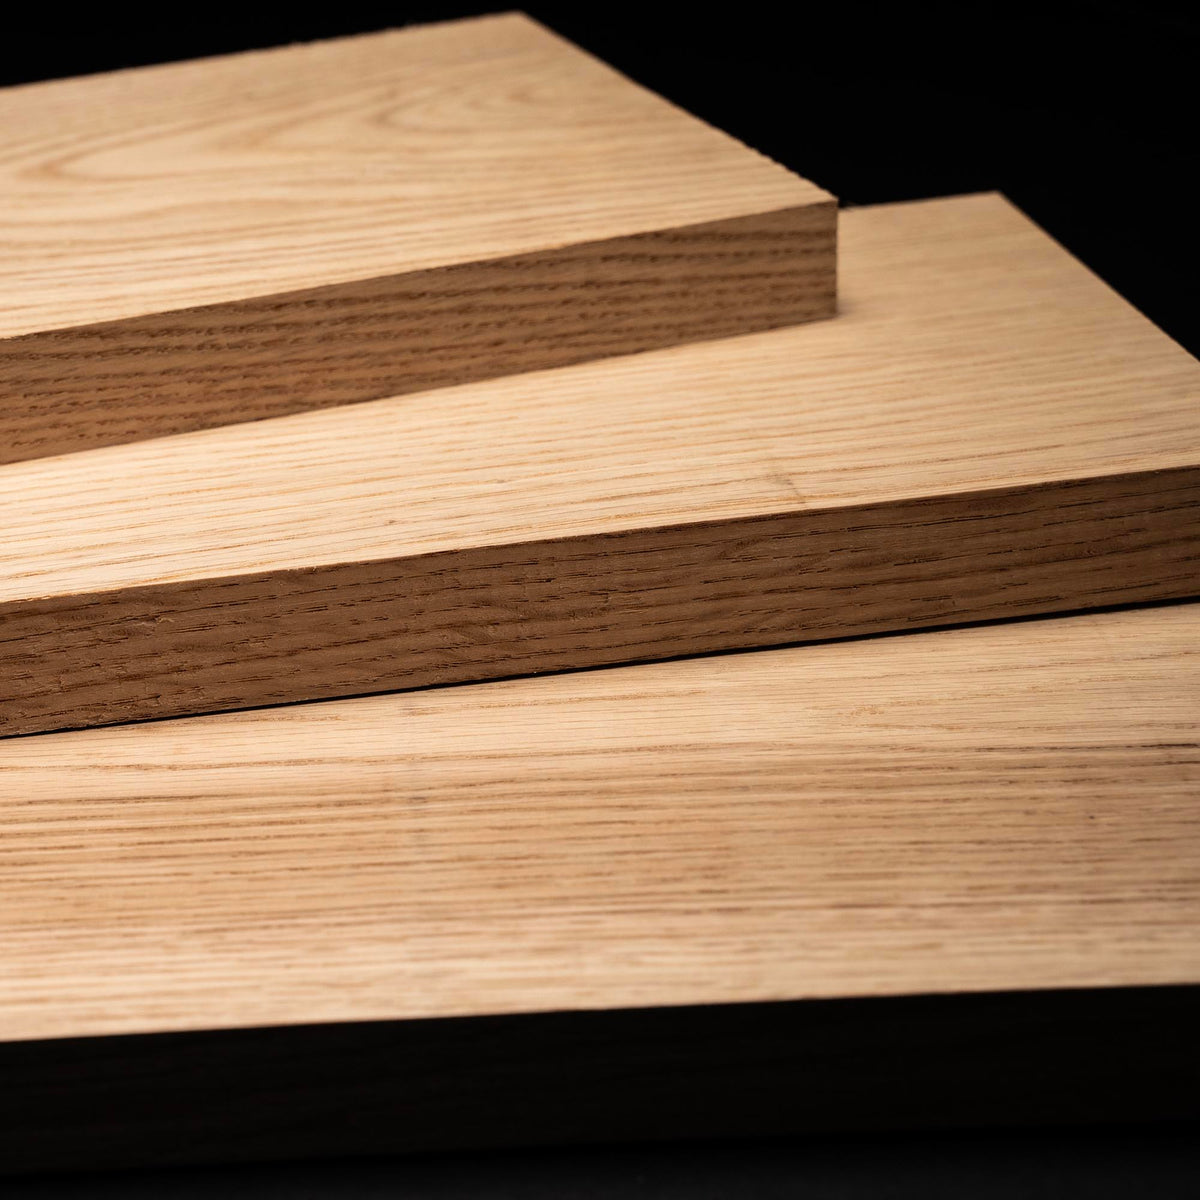 4/4 1&quot; Red Oak Lumber Pack, S3S Clear/Select Boards - Kiln Dried - Packs of 10, 50, 100 Board Feet